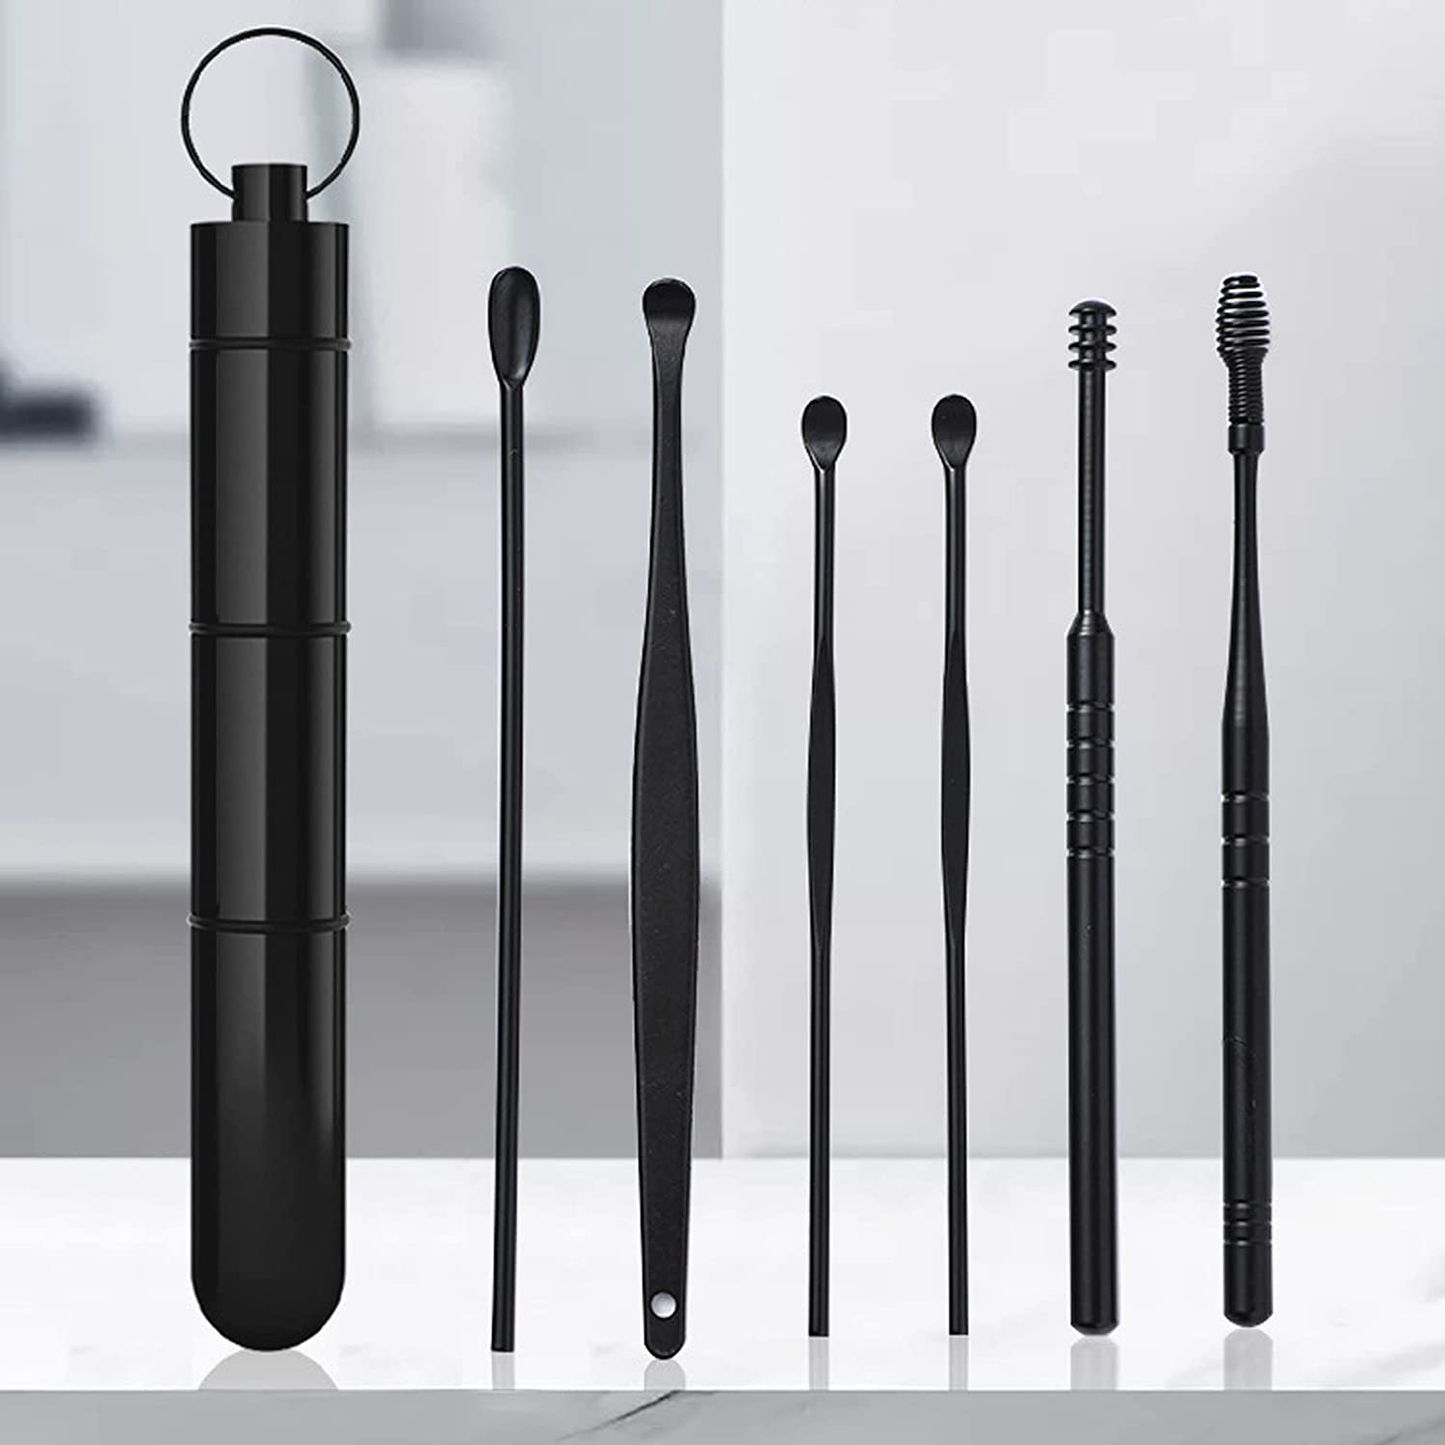 Ear Wax Removal Tool, Ear Cleaner 6-In-1 Stainless Steel, Ear Cleaning Kit Prevents Scratching of the Ears, Available for Adults and Children, Ear Cleaning Kit with a Storage Box (Black)